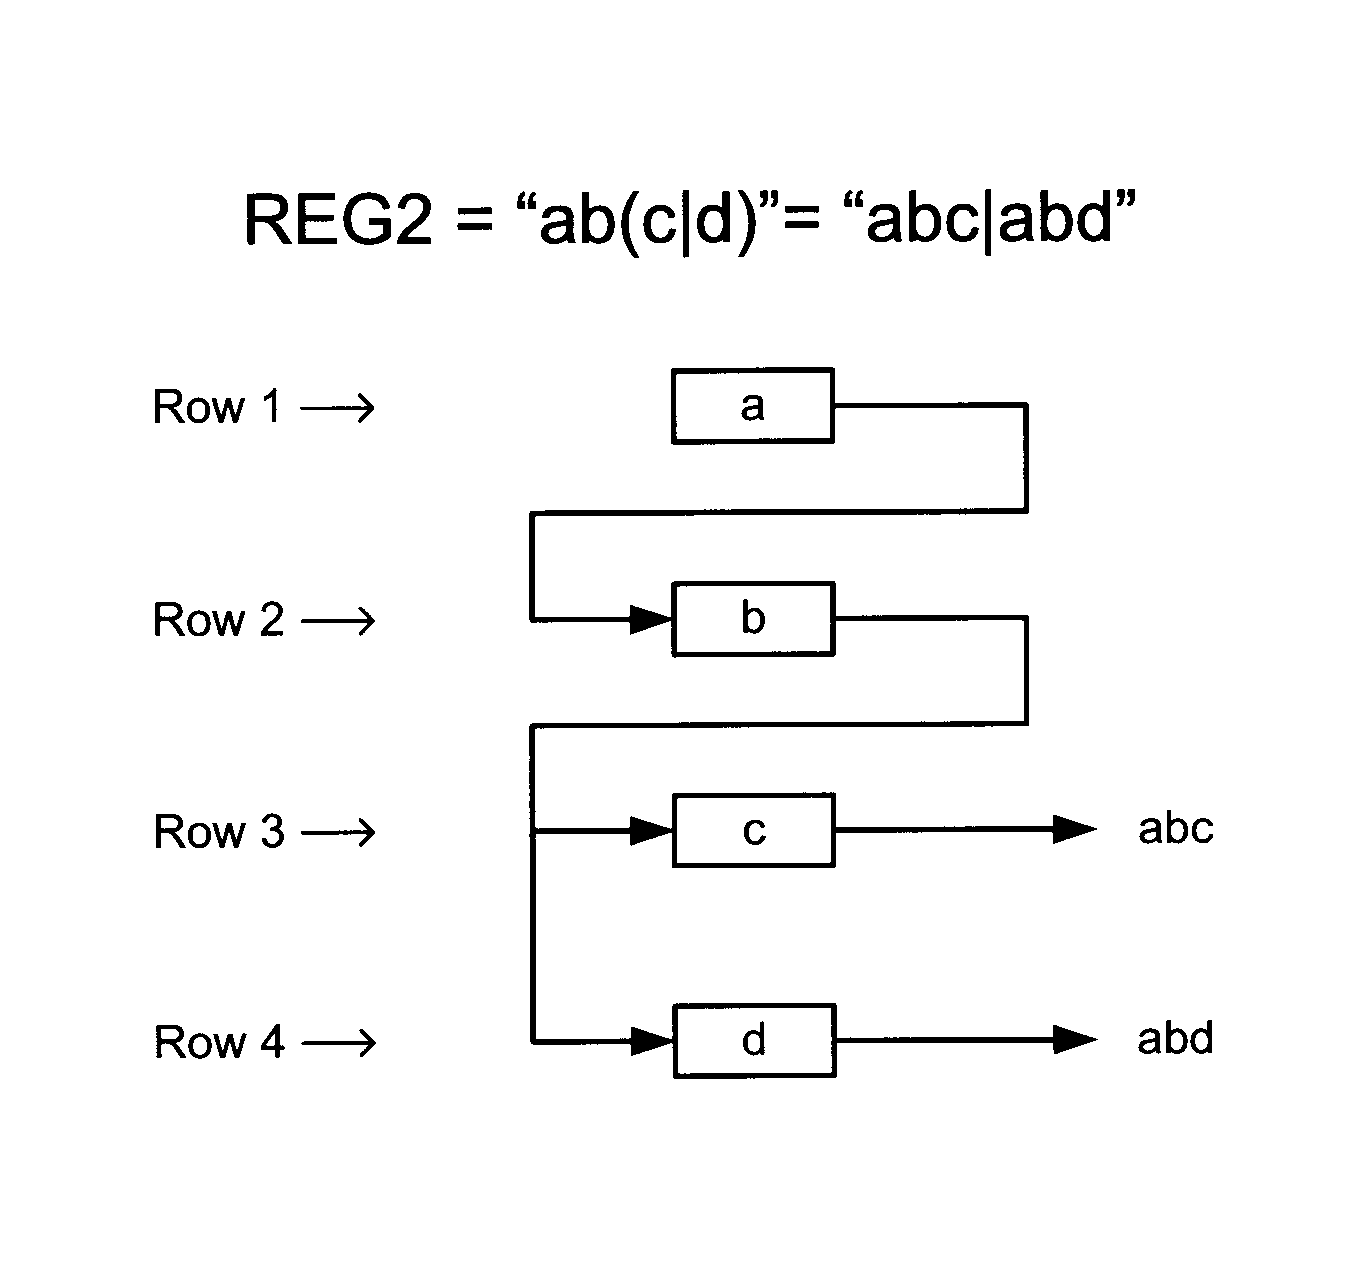 Content addressable memory having programmable interconnect structure